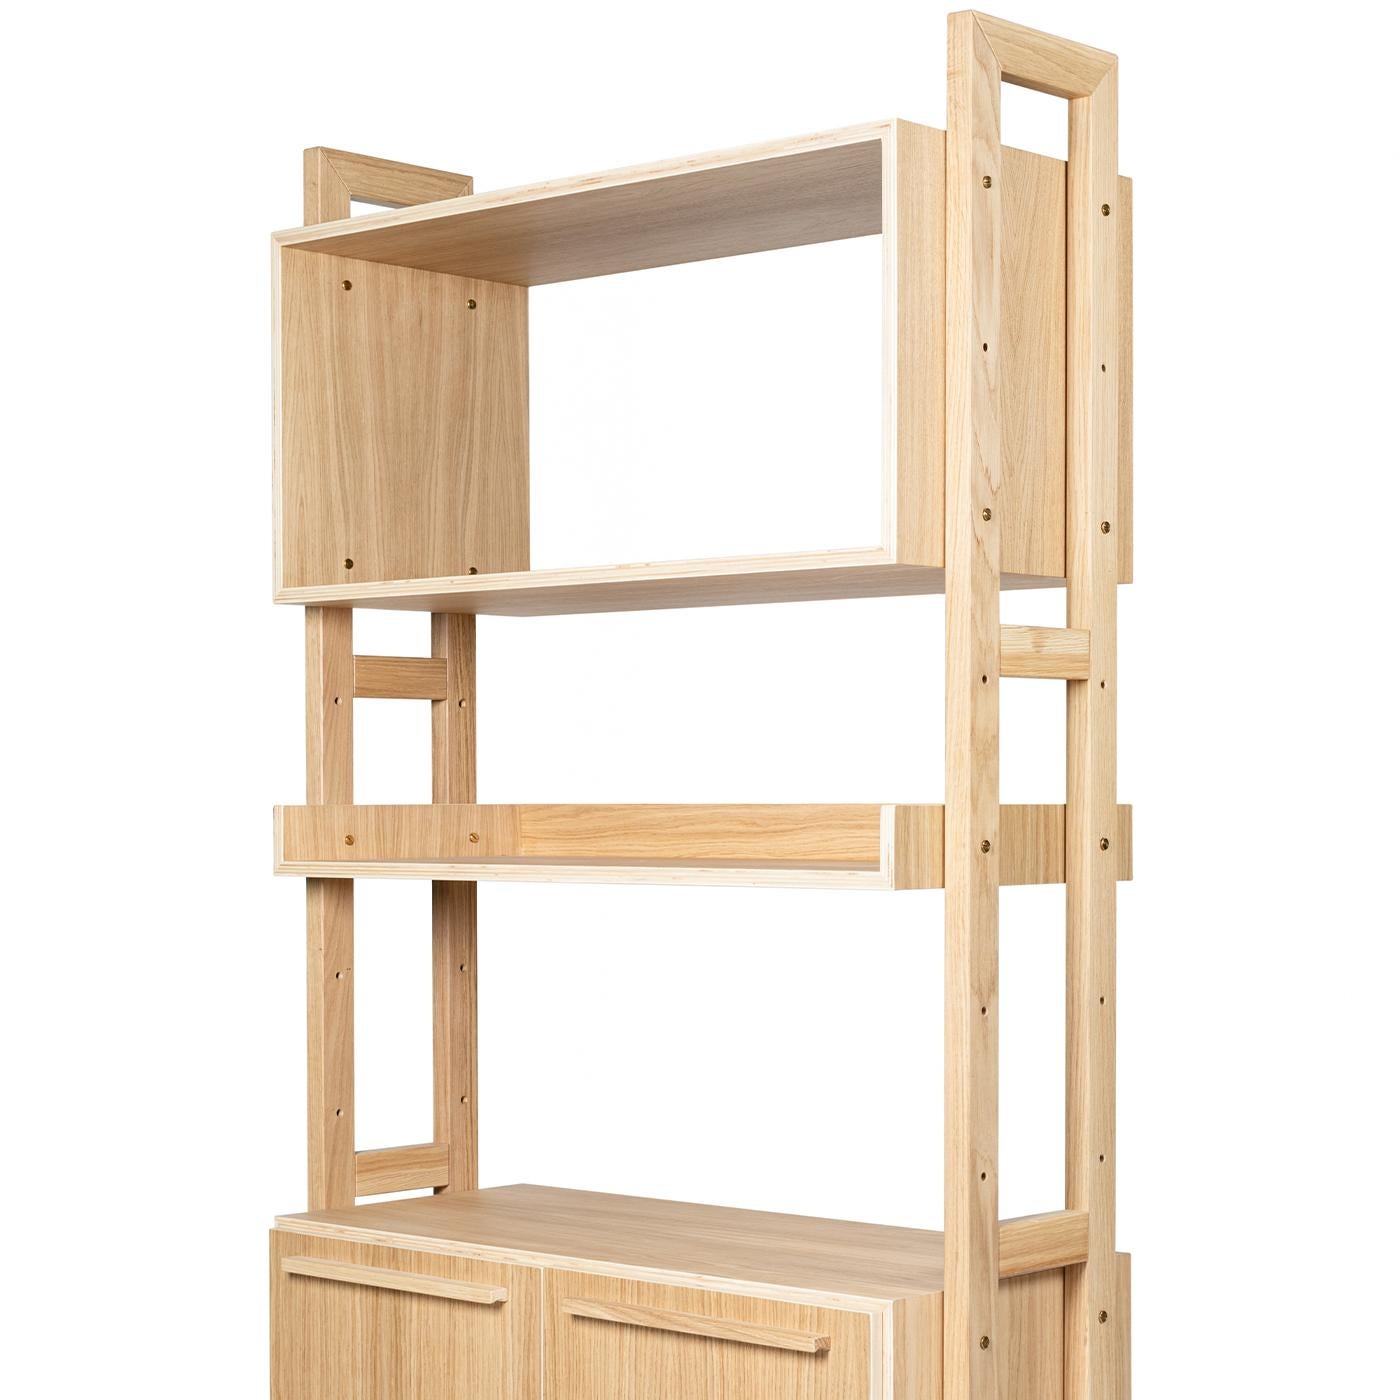 This modular, customizable bookshelf with sides in solid oak and shelves and containers in oak plywood will give a modern touch to living or office spaces. Shelves can be positioned where needed thanks to holes at different heights in the supporting